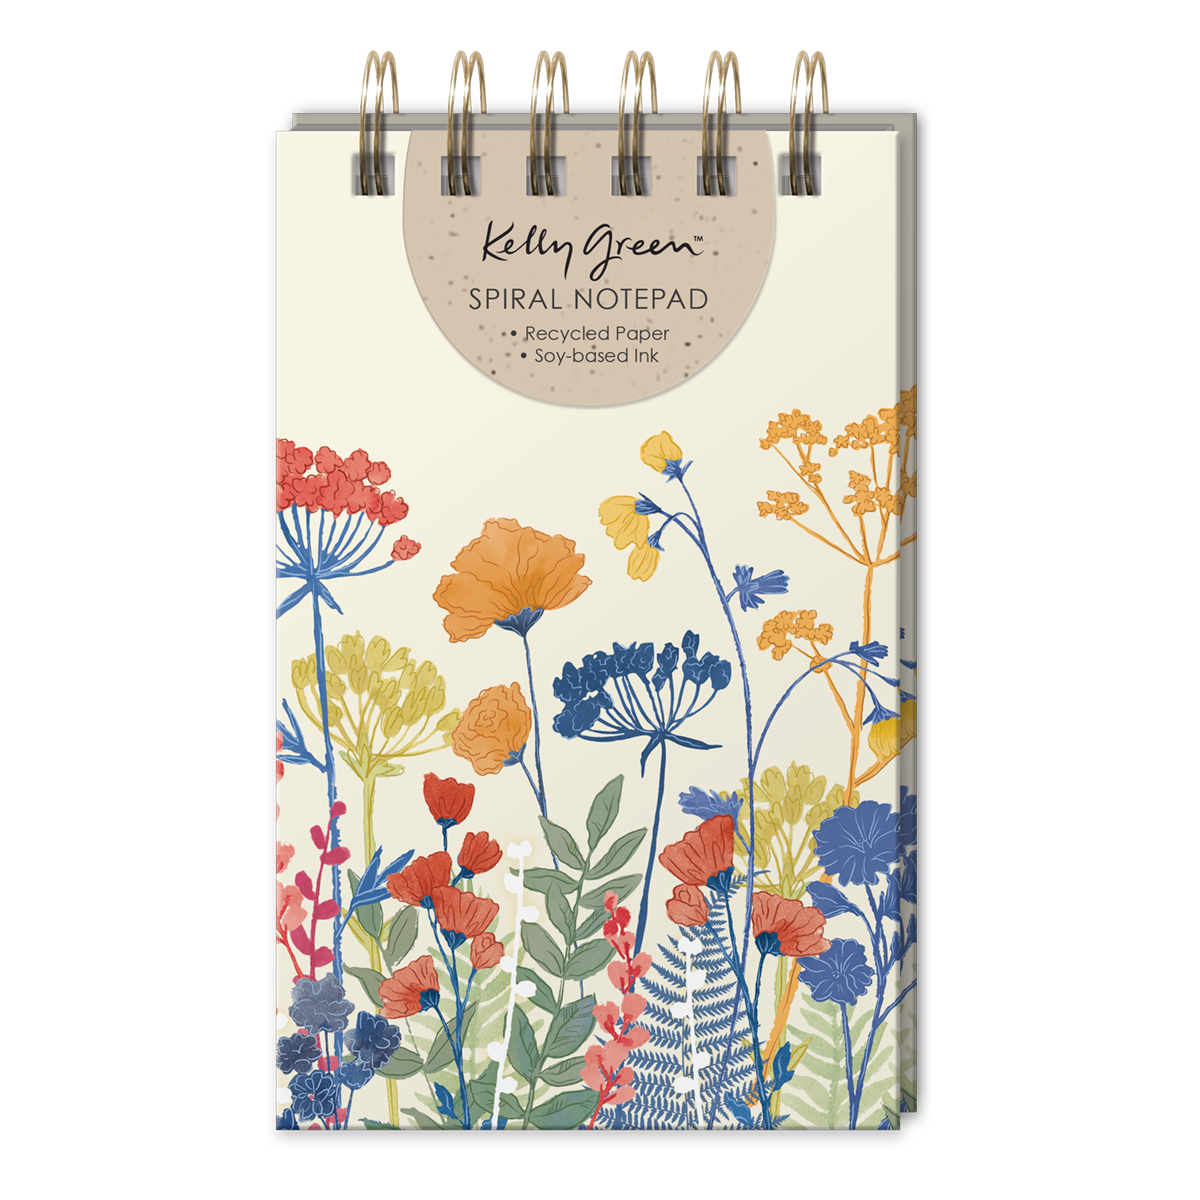 cream colored notebook, spirl bound on top, with floral design on cover.